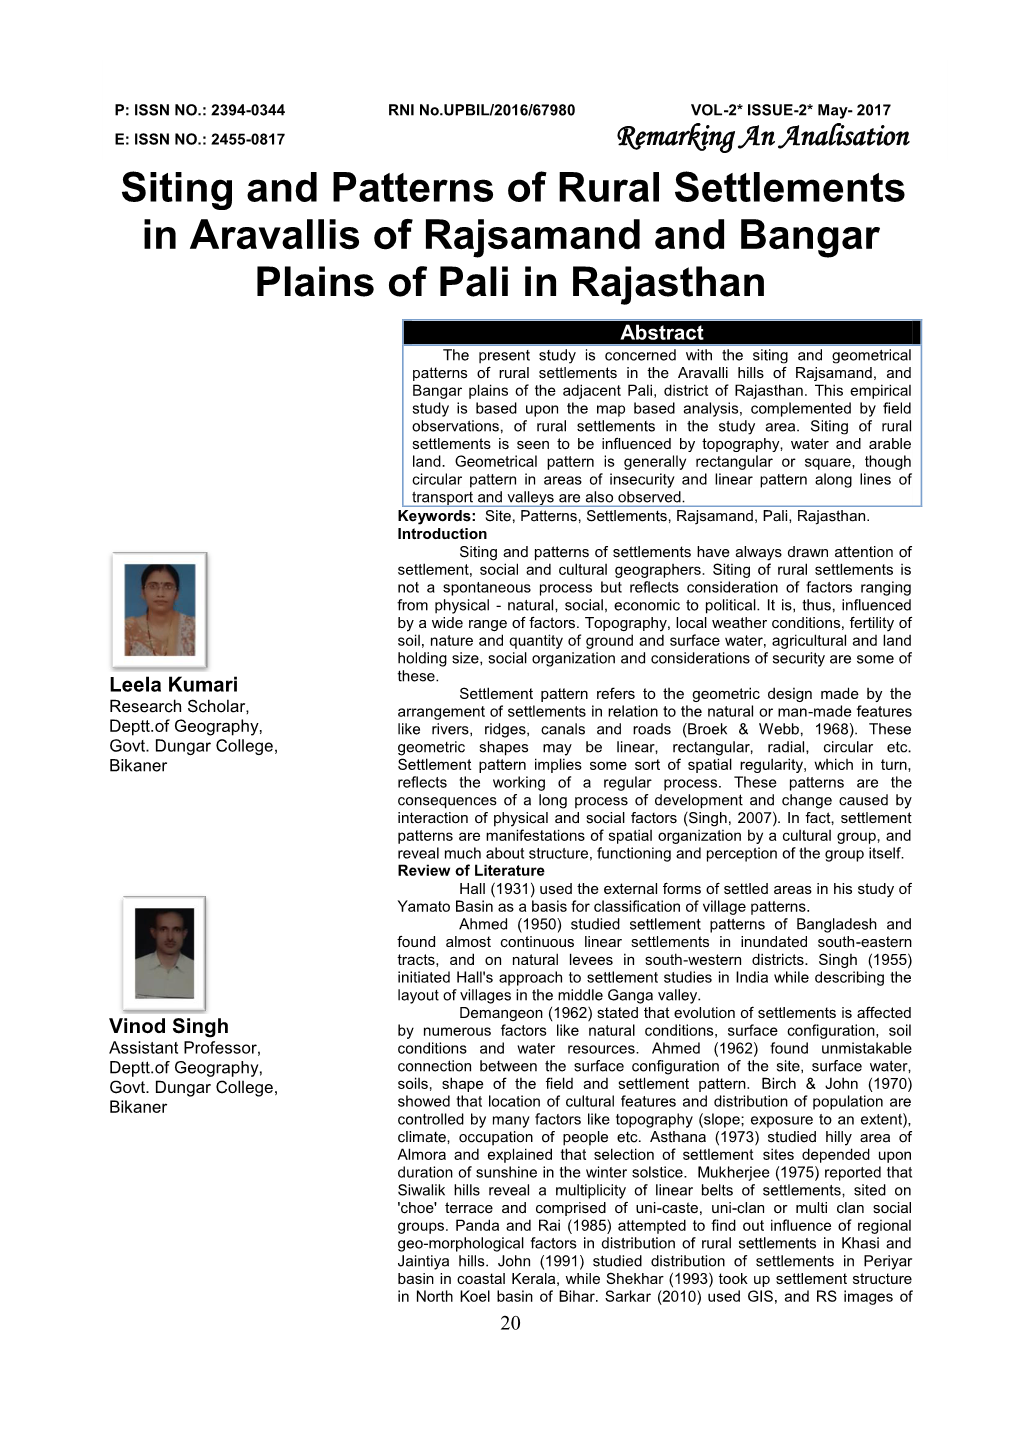 Siting and Patterns of Rural Settlements in Aravallis Of